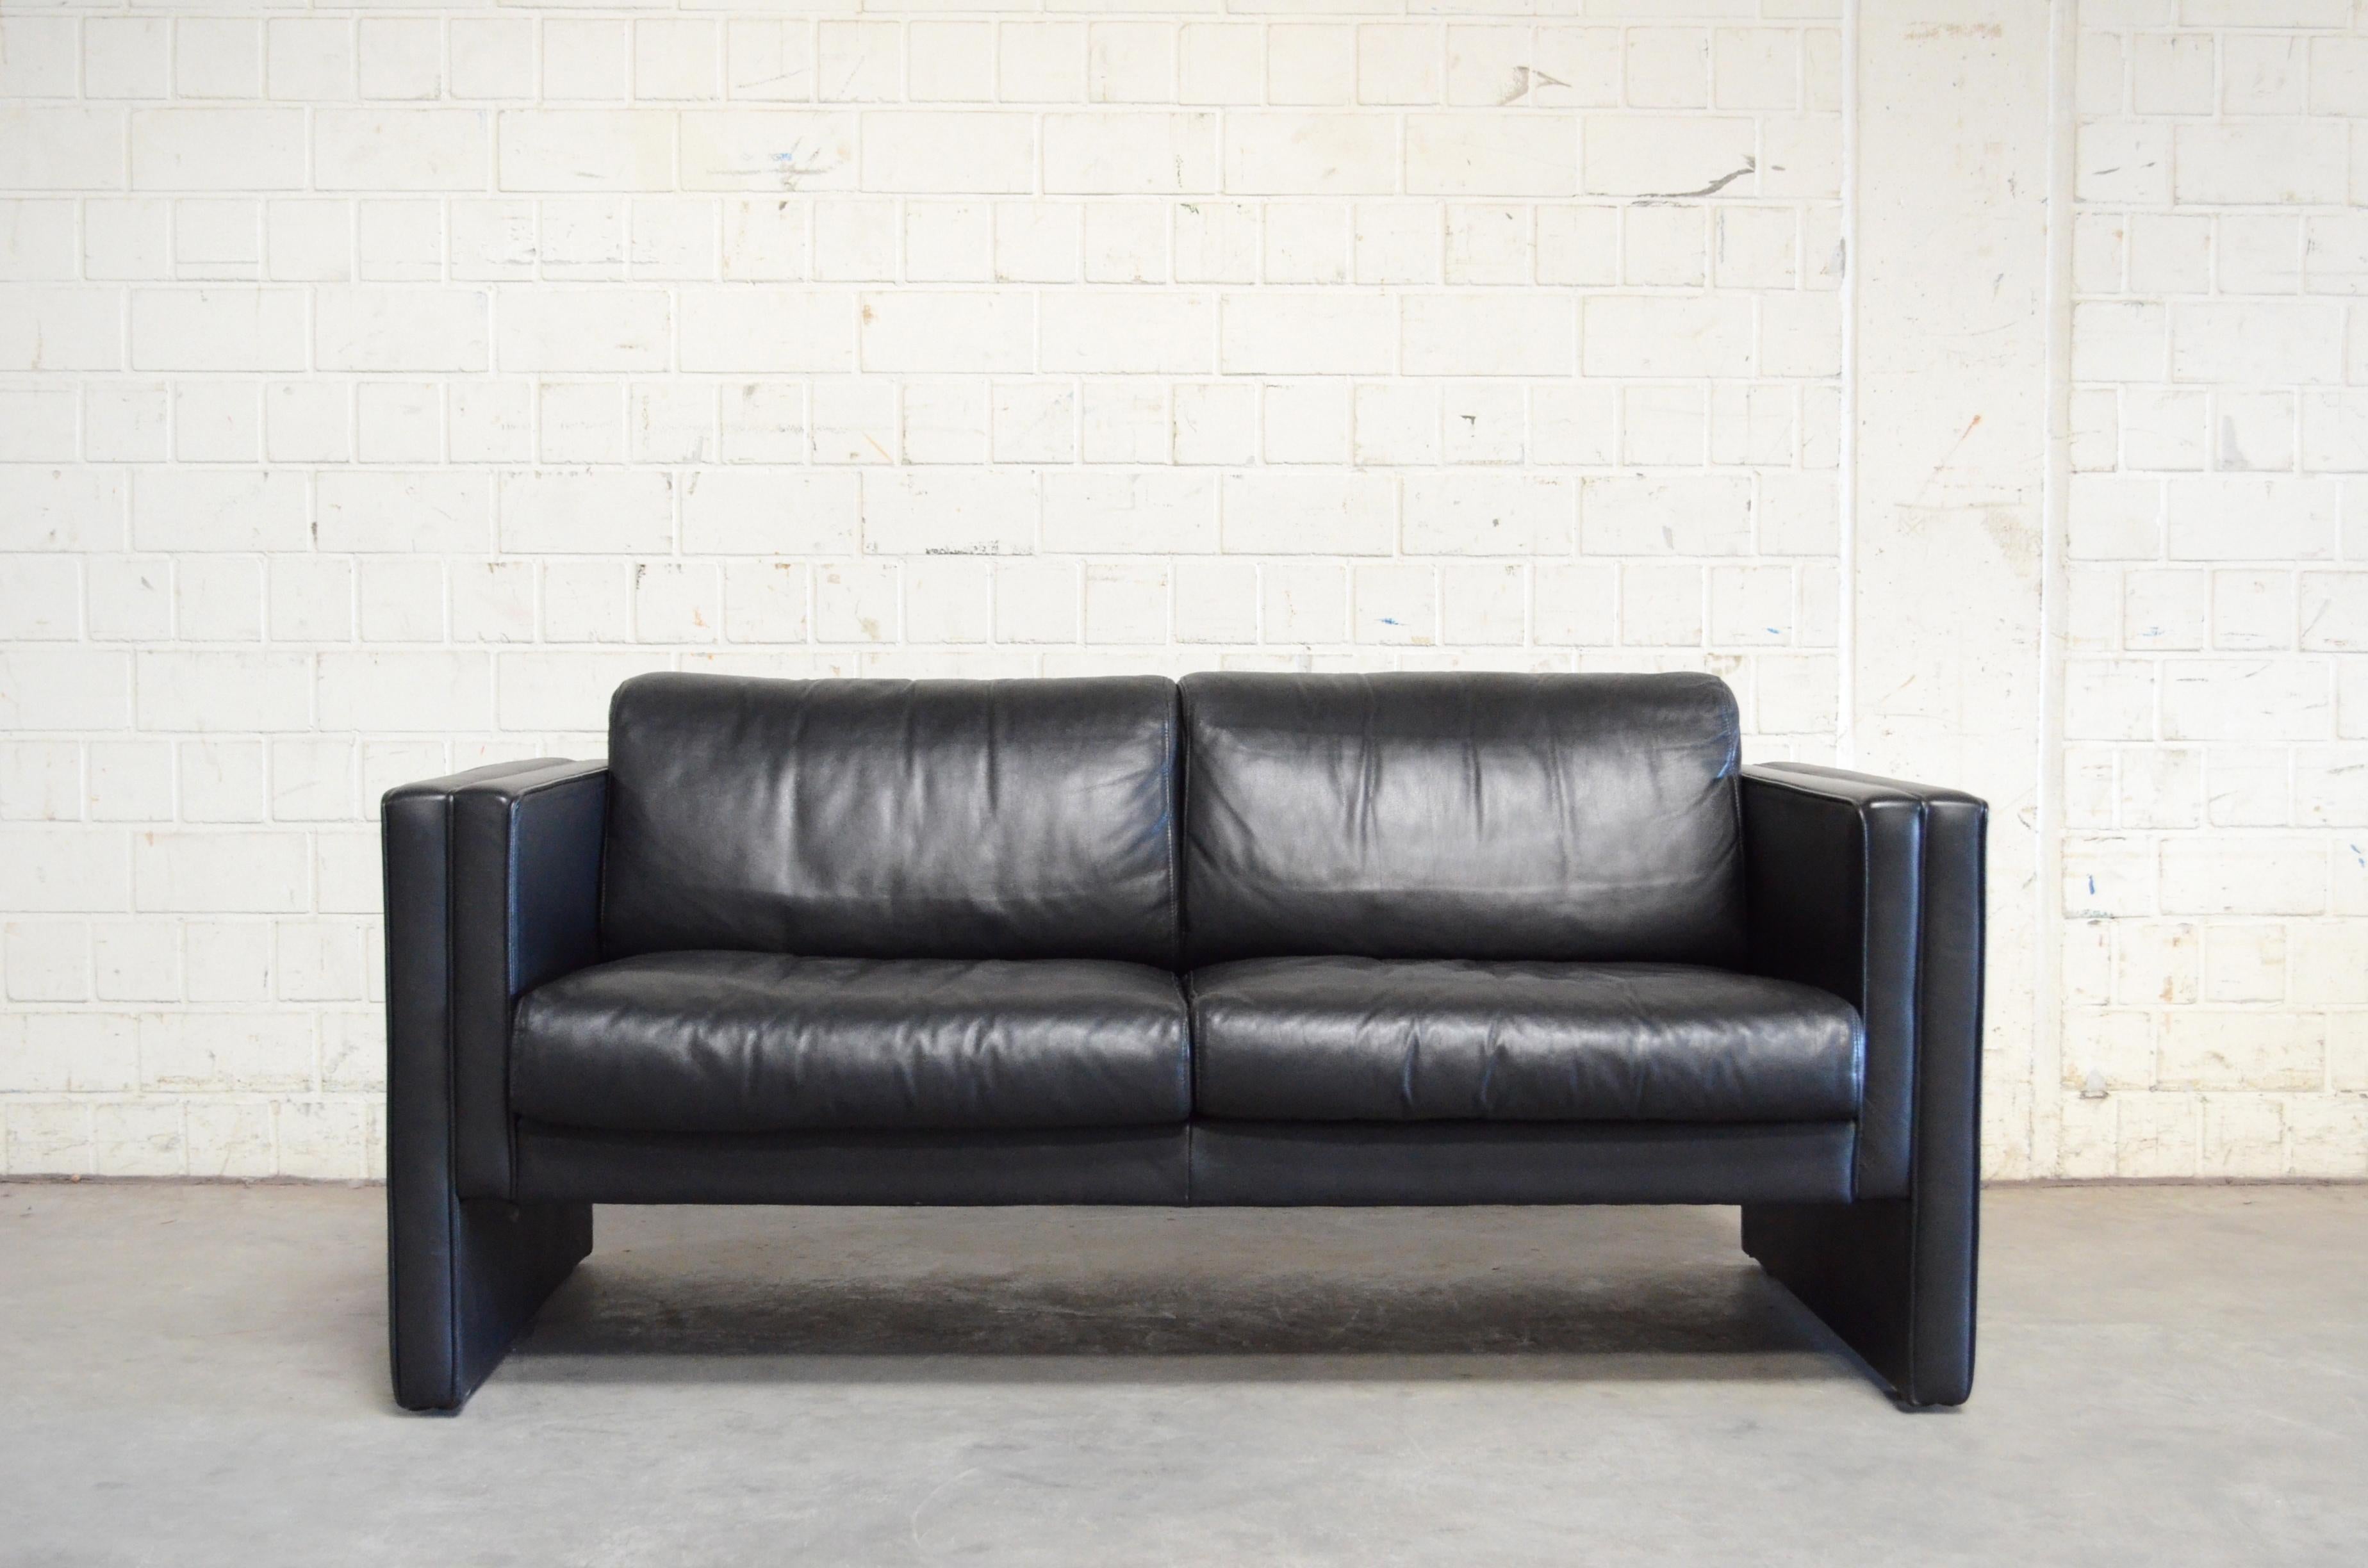 This sofa was designed by Jürgen Lange in the late 1970s and was manufactured by Walter Knoll.
Model Studio with black semianilne leather.
A great German design that fit´s well in a at home or as well in the office spaces.
Very good condition.